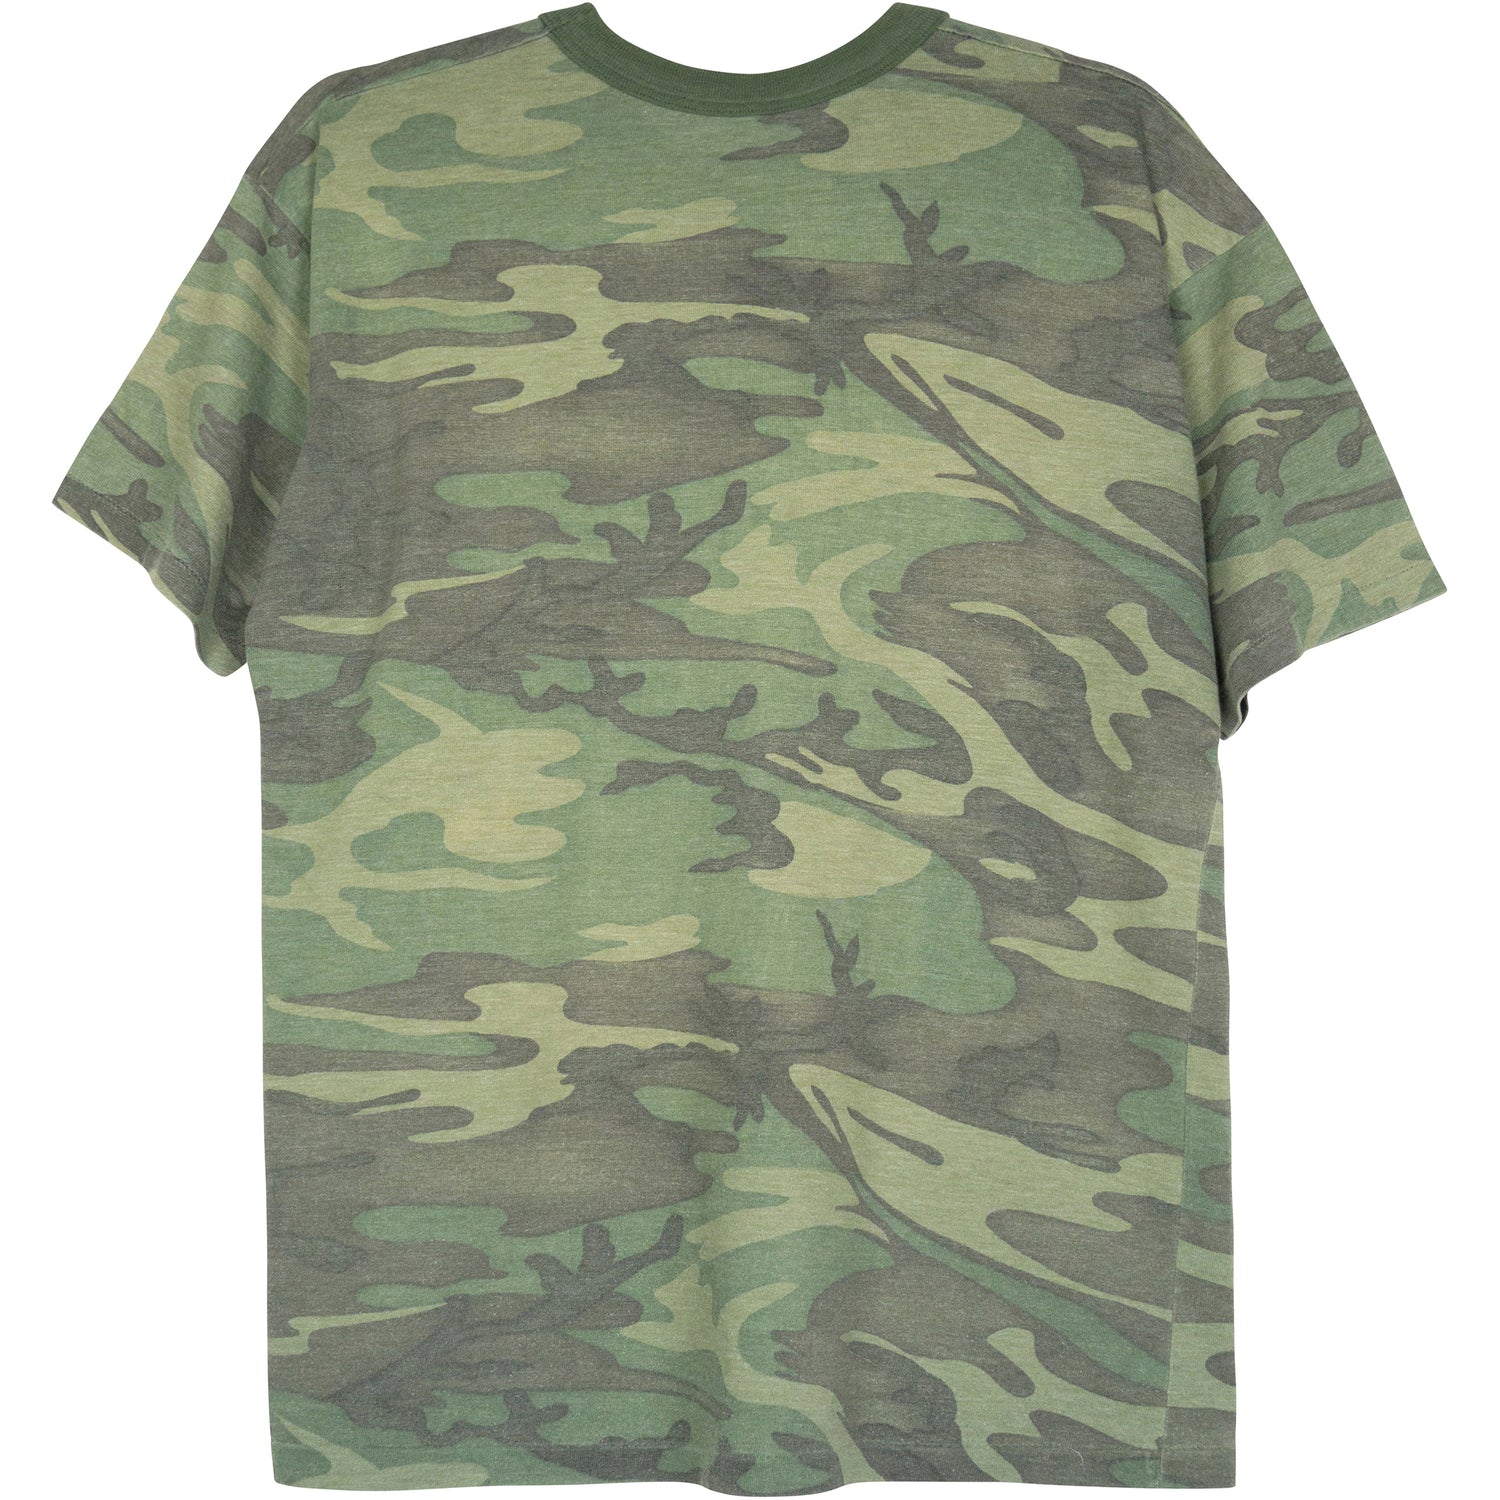 VINTAGE CAMOUFLAGE ARMY T-SHIRT